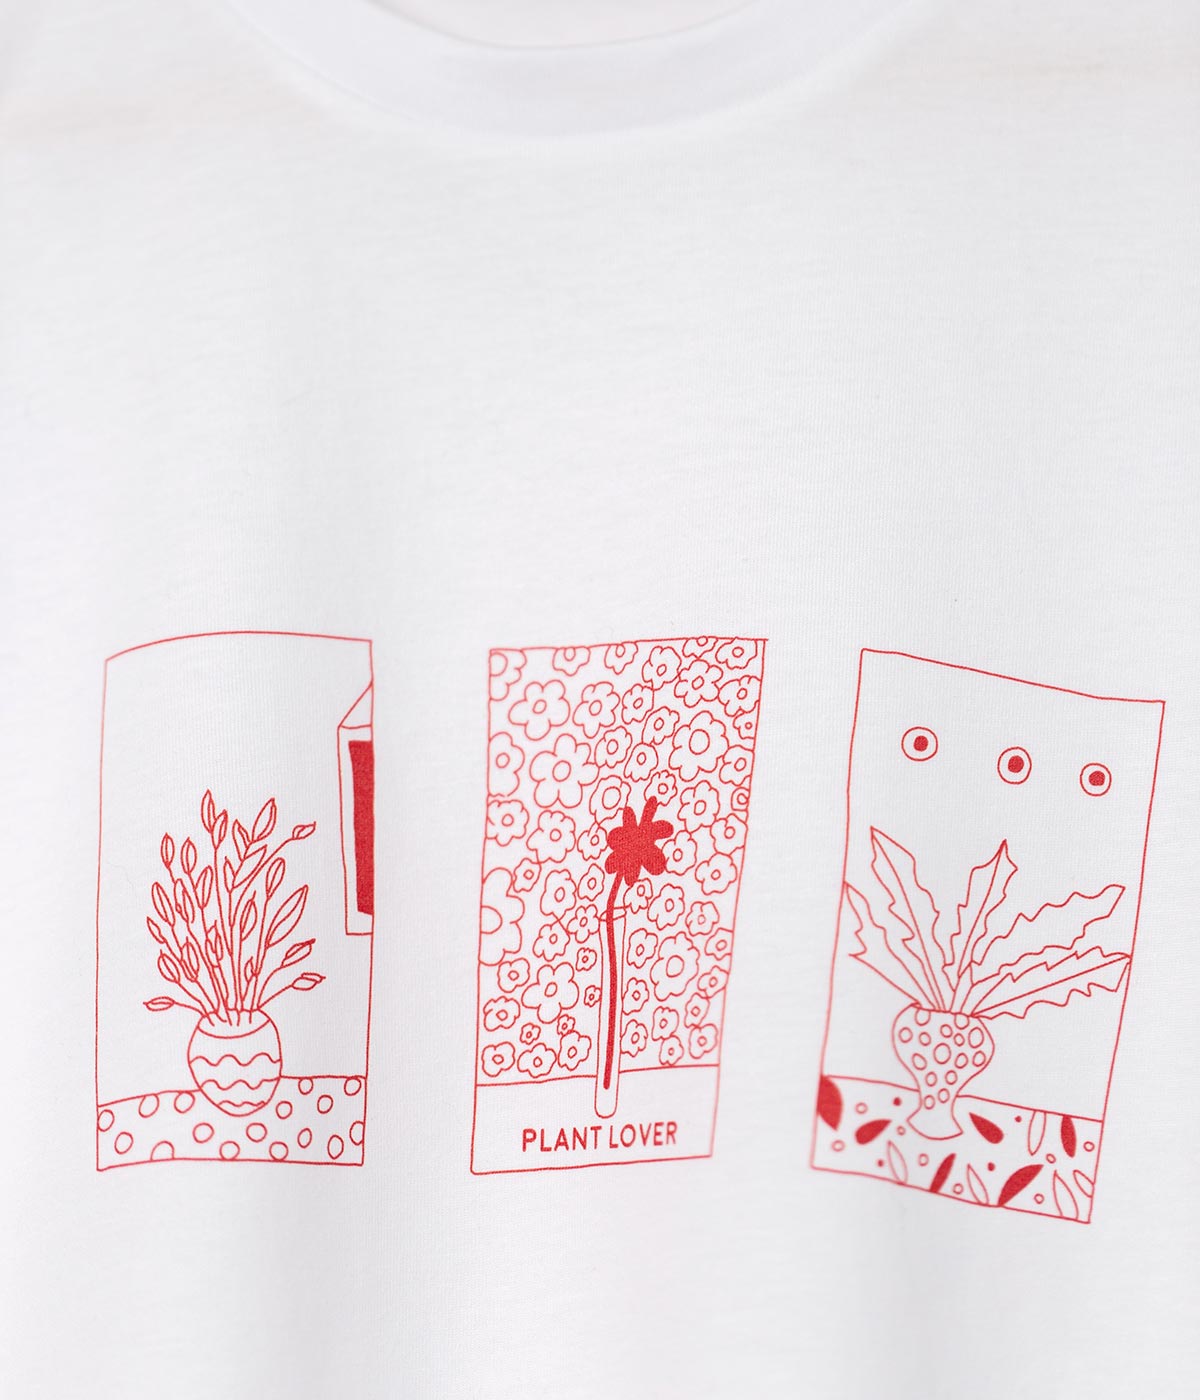 Close-up of white cotton t-shirt printed with red plants placed in 3 rectangles on chest.